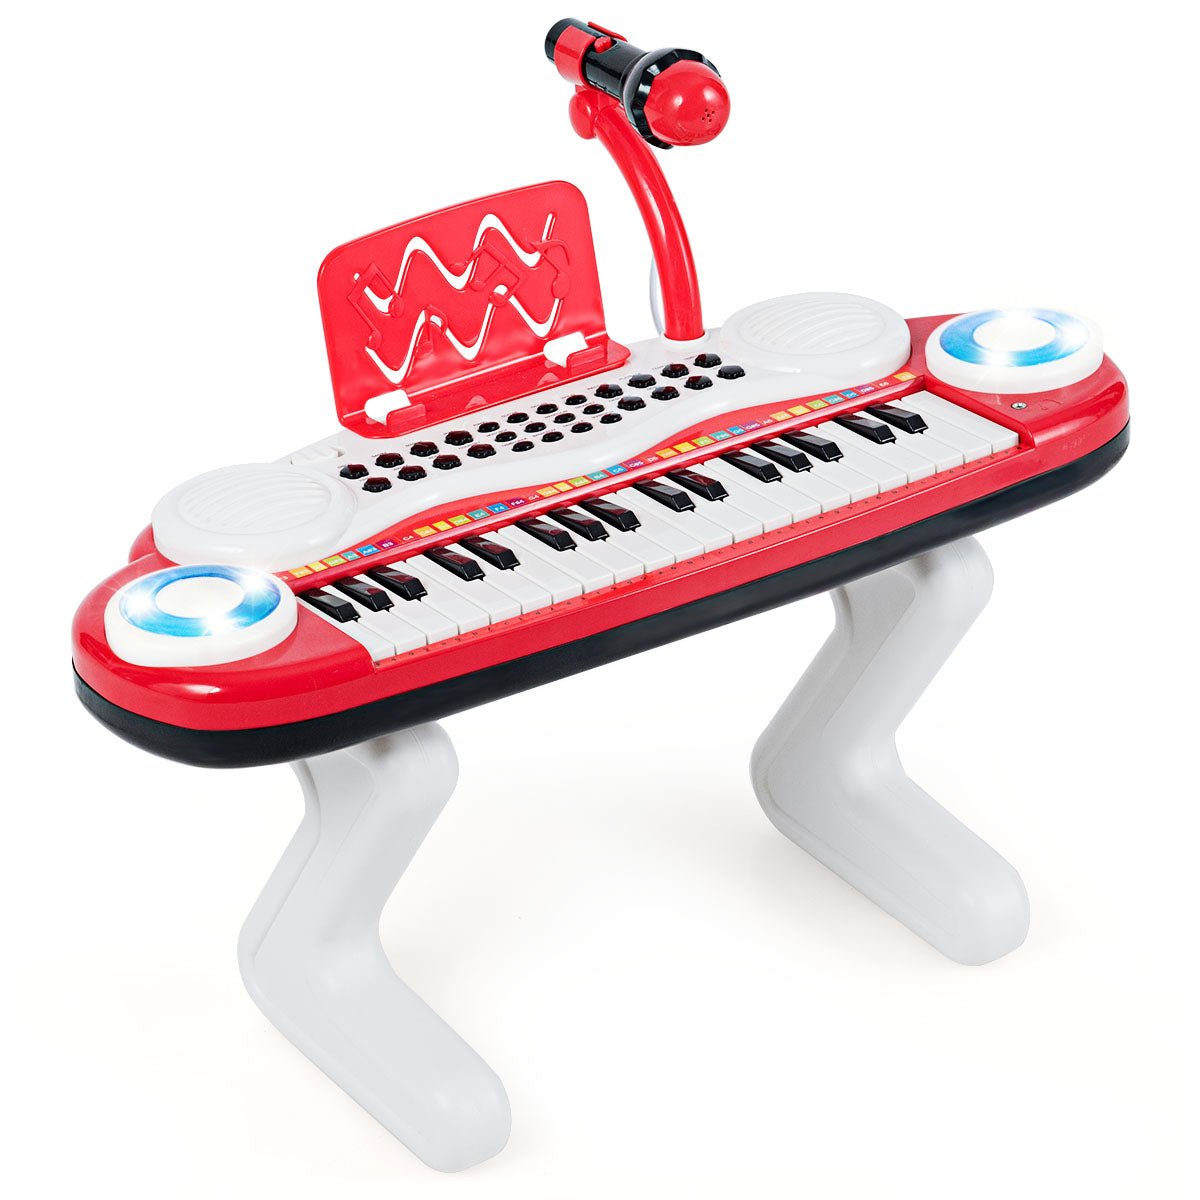 Shop the Red Electronic Keyboard Piano with Microphone for Kids